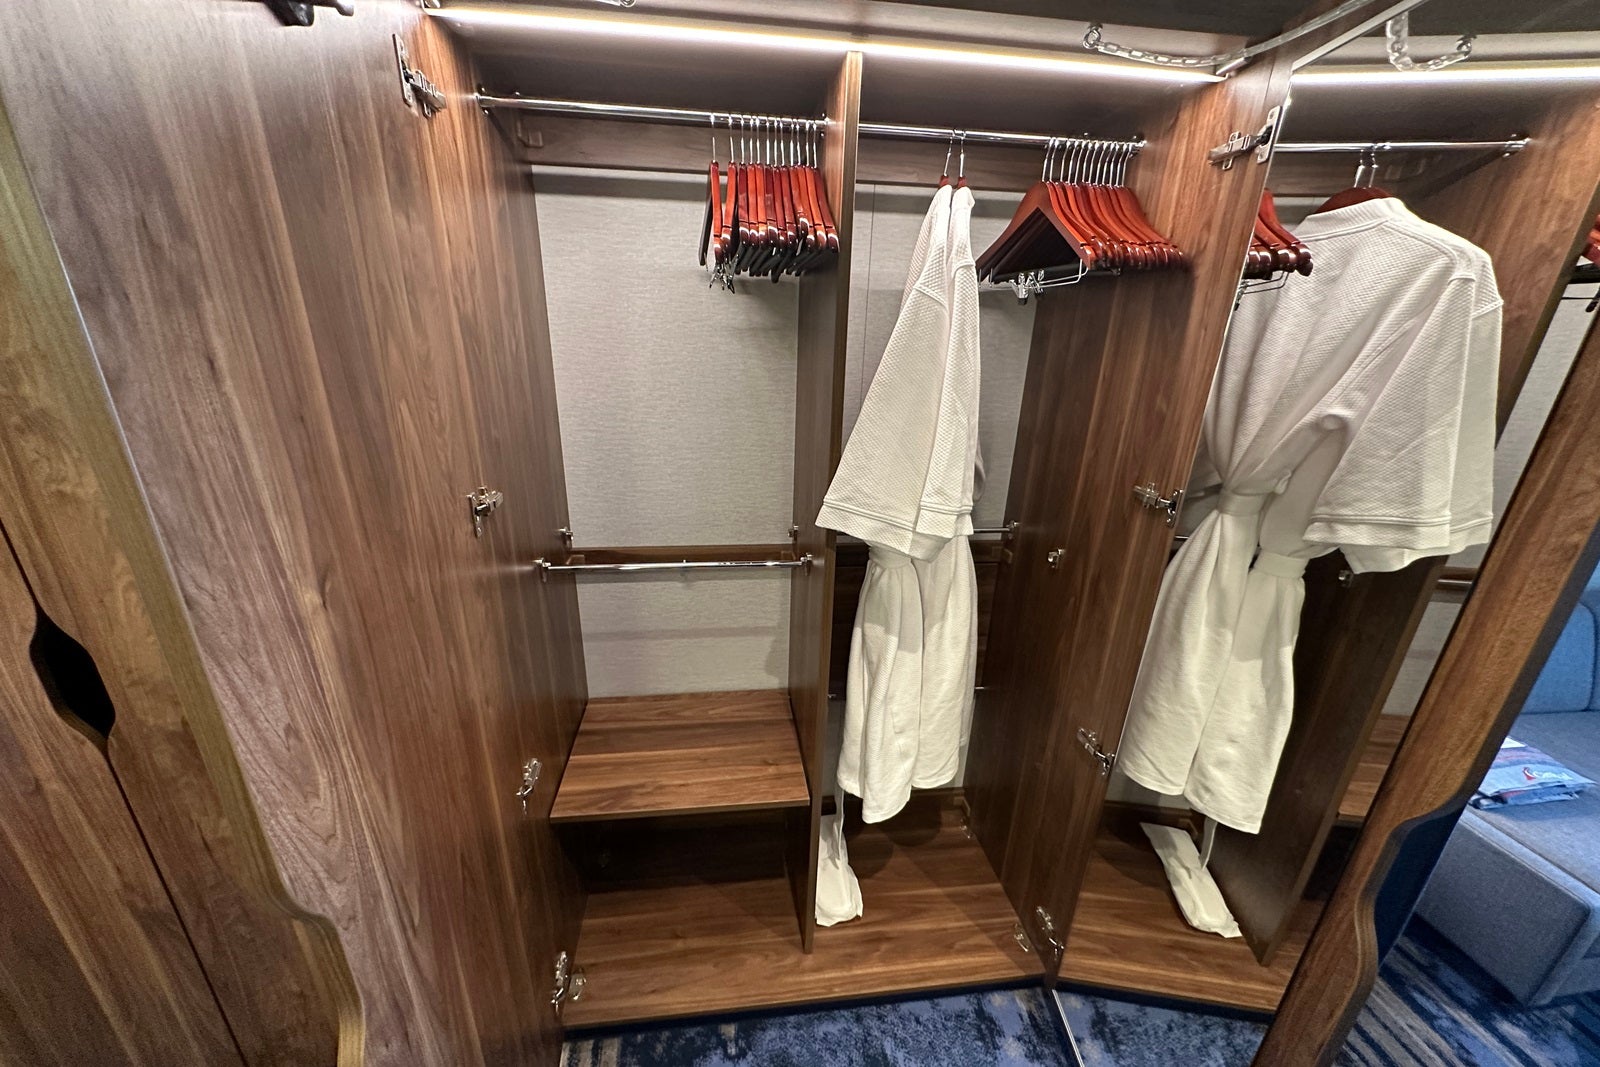 Two robes and some wooden hangers hang in a wooden closet with shelves